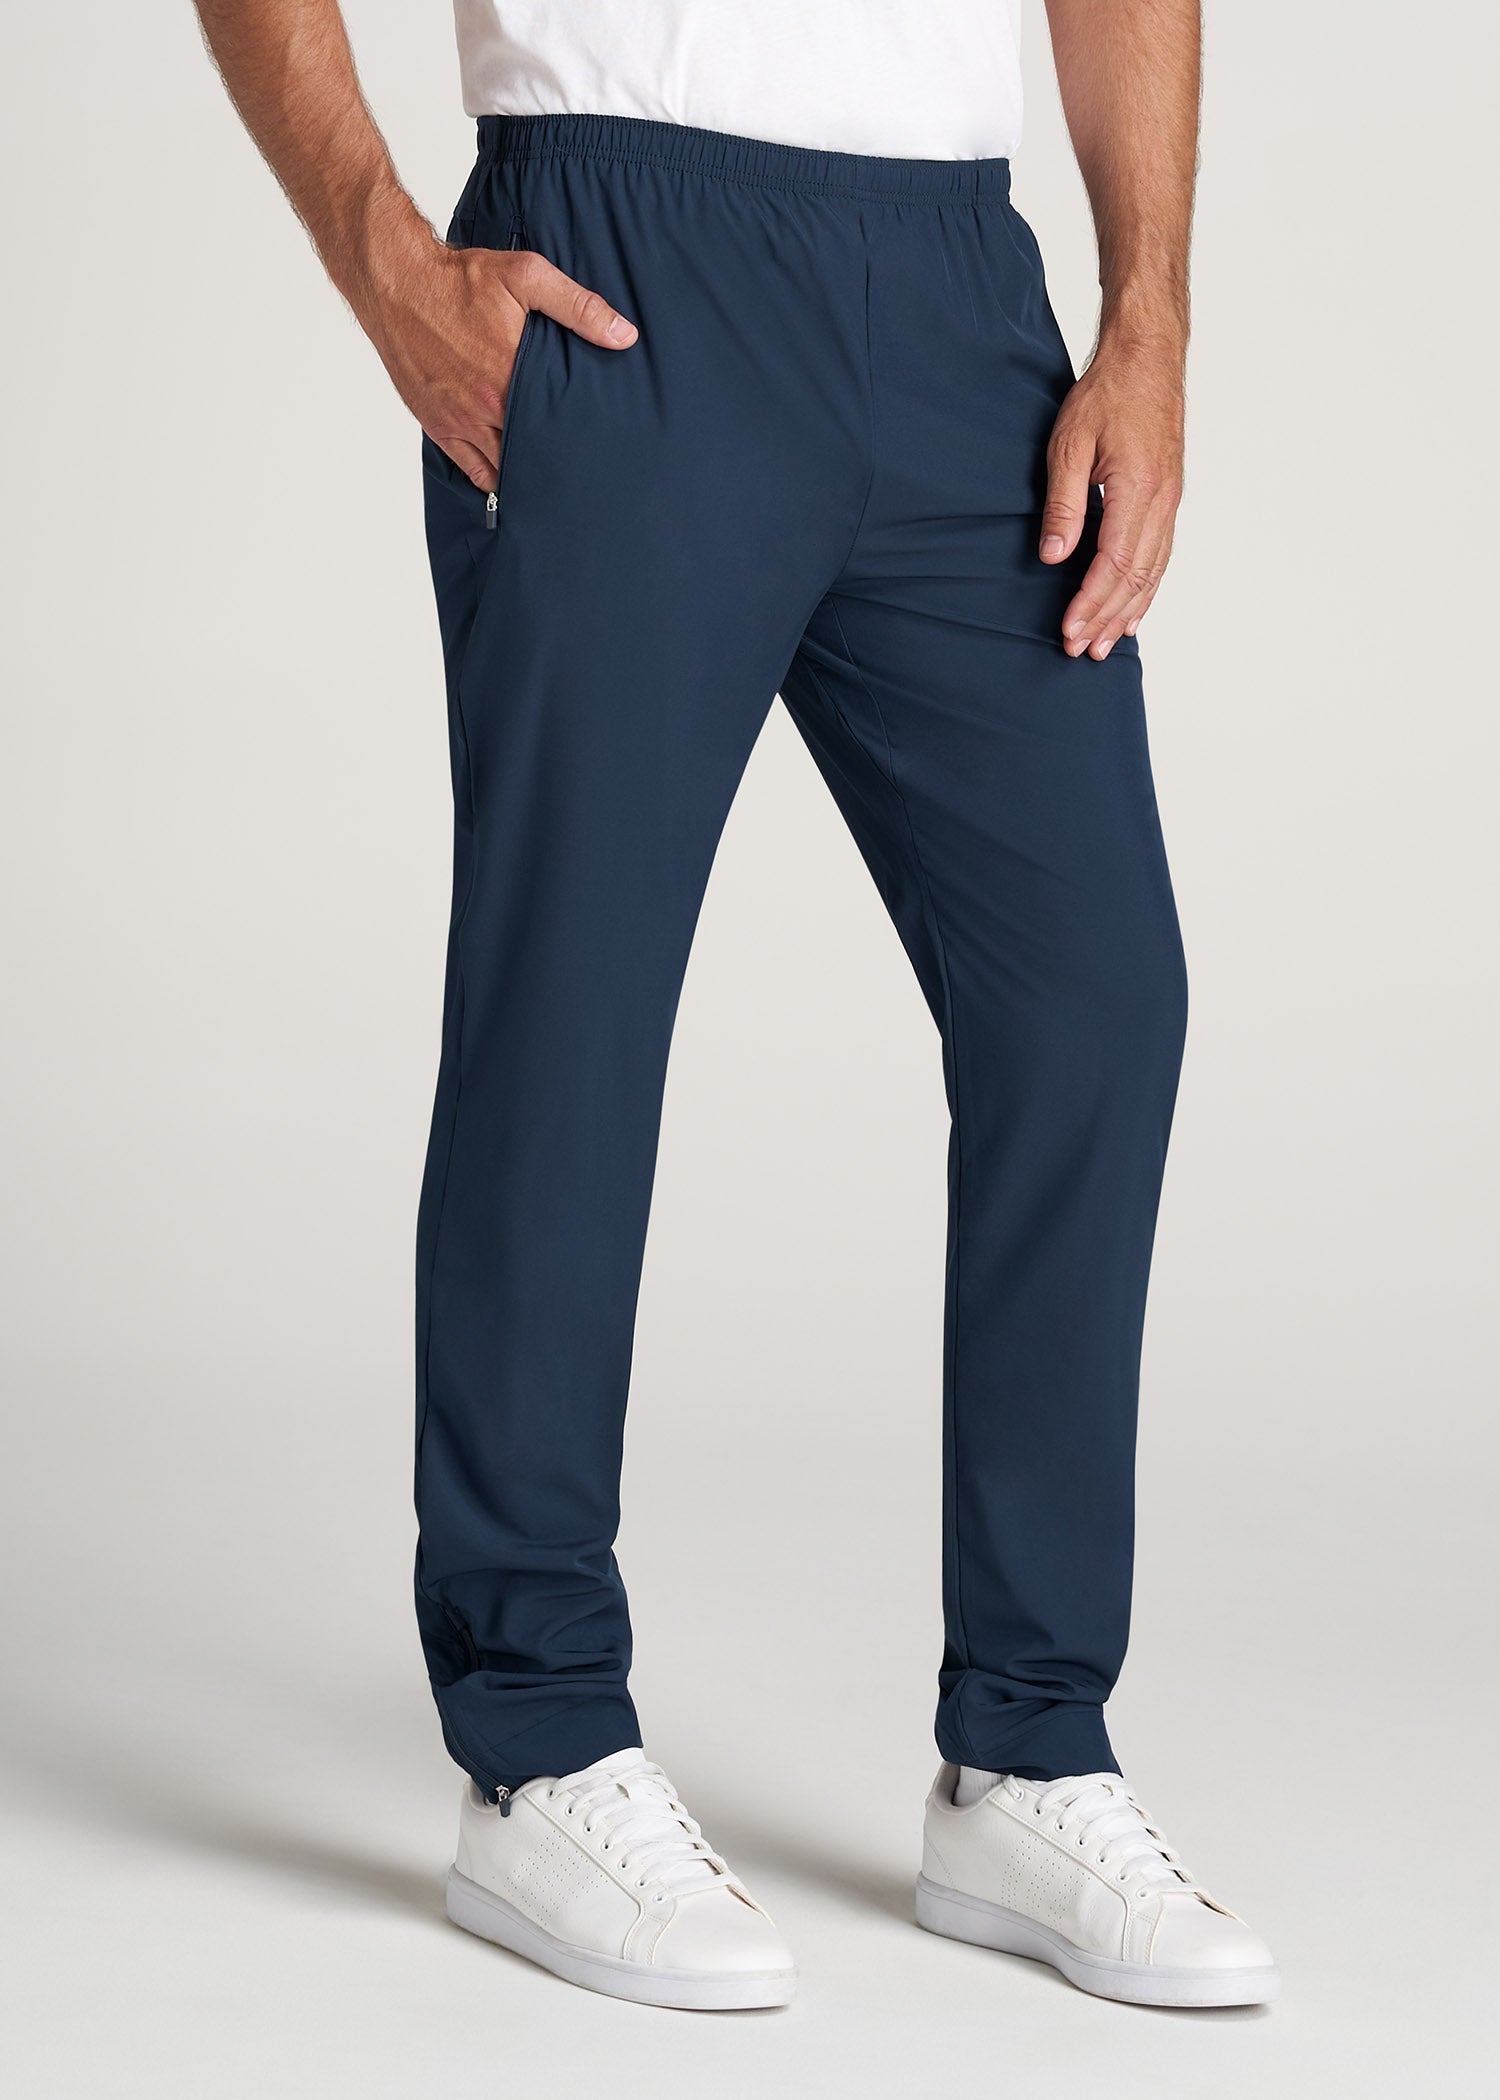 American-Tall-Men-TaperedFit-LightWeight-AthleticPant-Navy-front